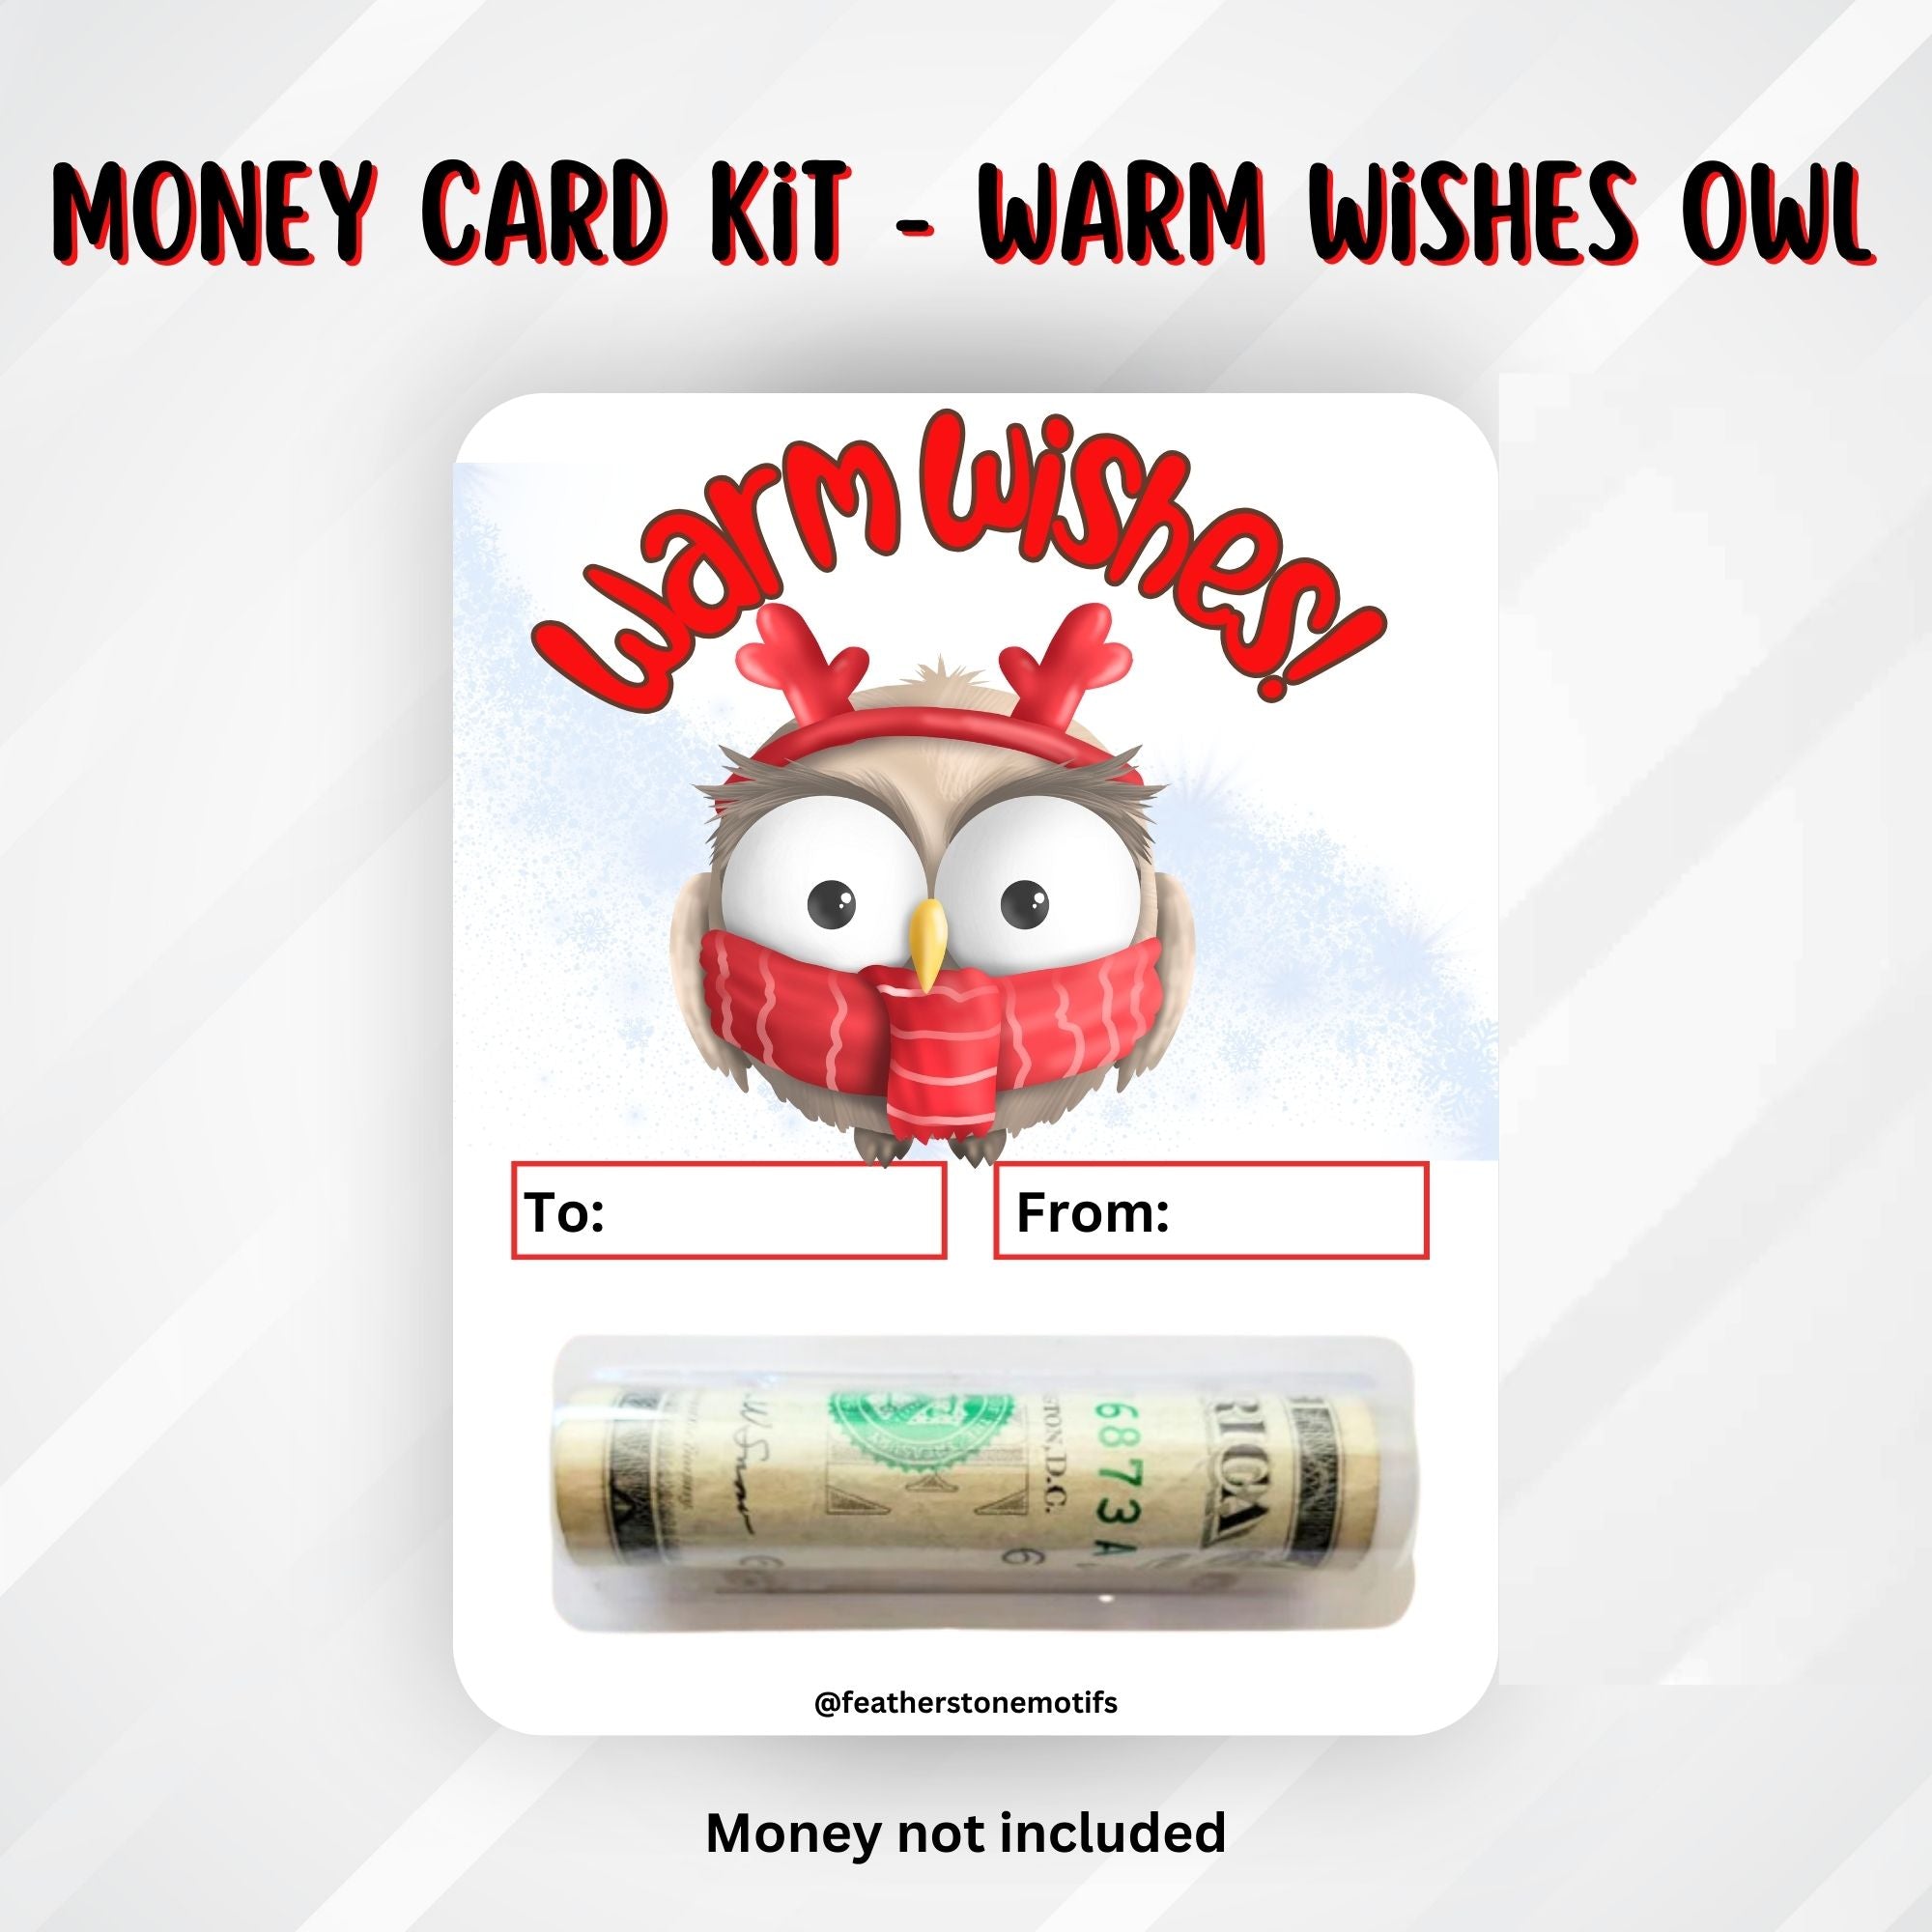 This image shows the money tube attached to the Warm Wishes Owl Money Card.